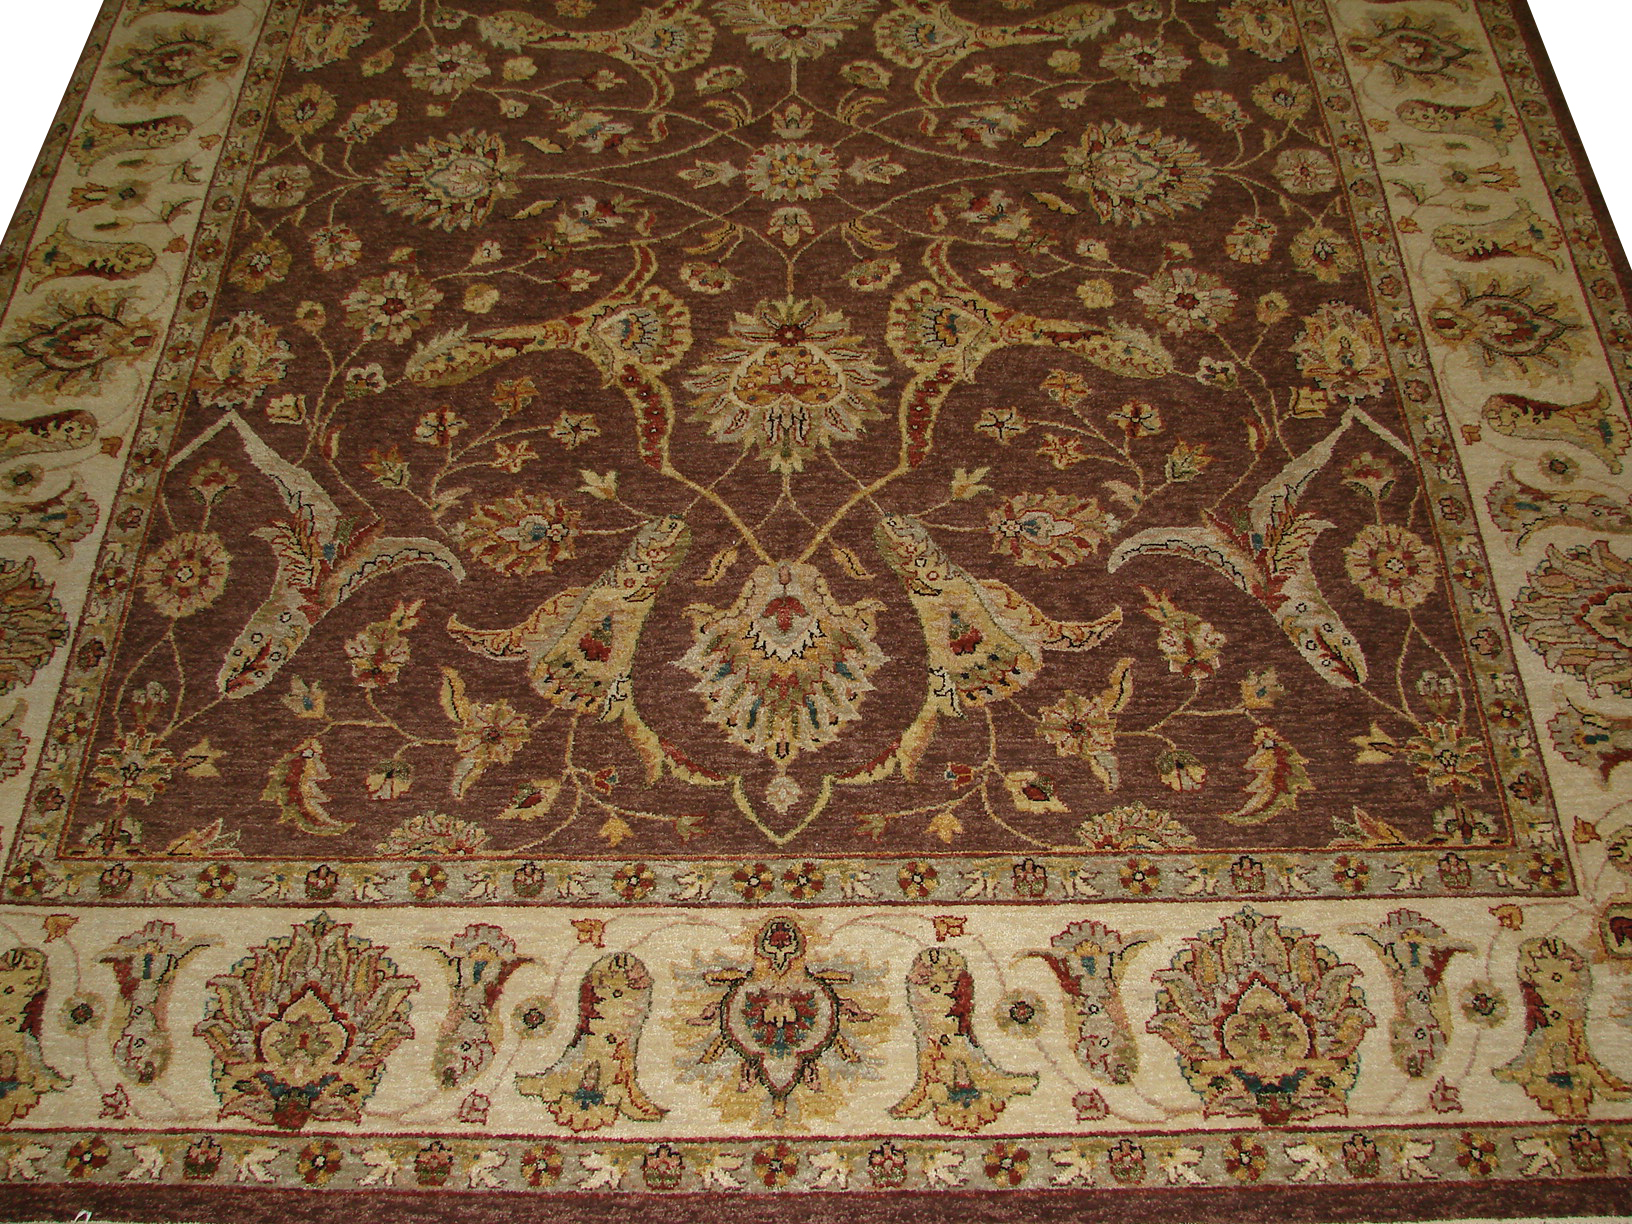 Clearance & Discount Rugs Hand Knotted 5171 Lt. Brown - Chocolate & Ivory - Beige Hand Knotted Rug